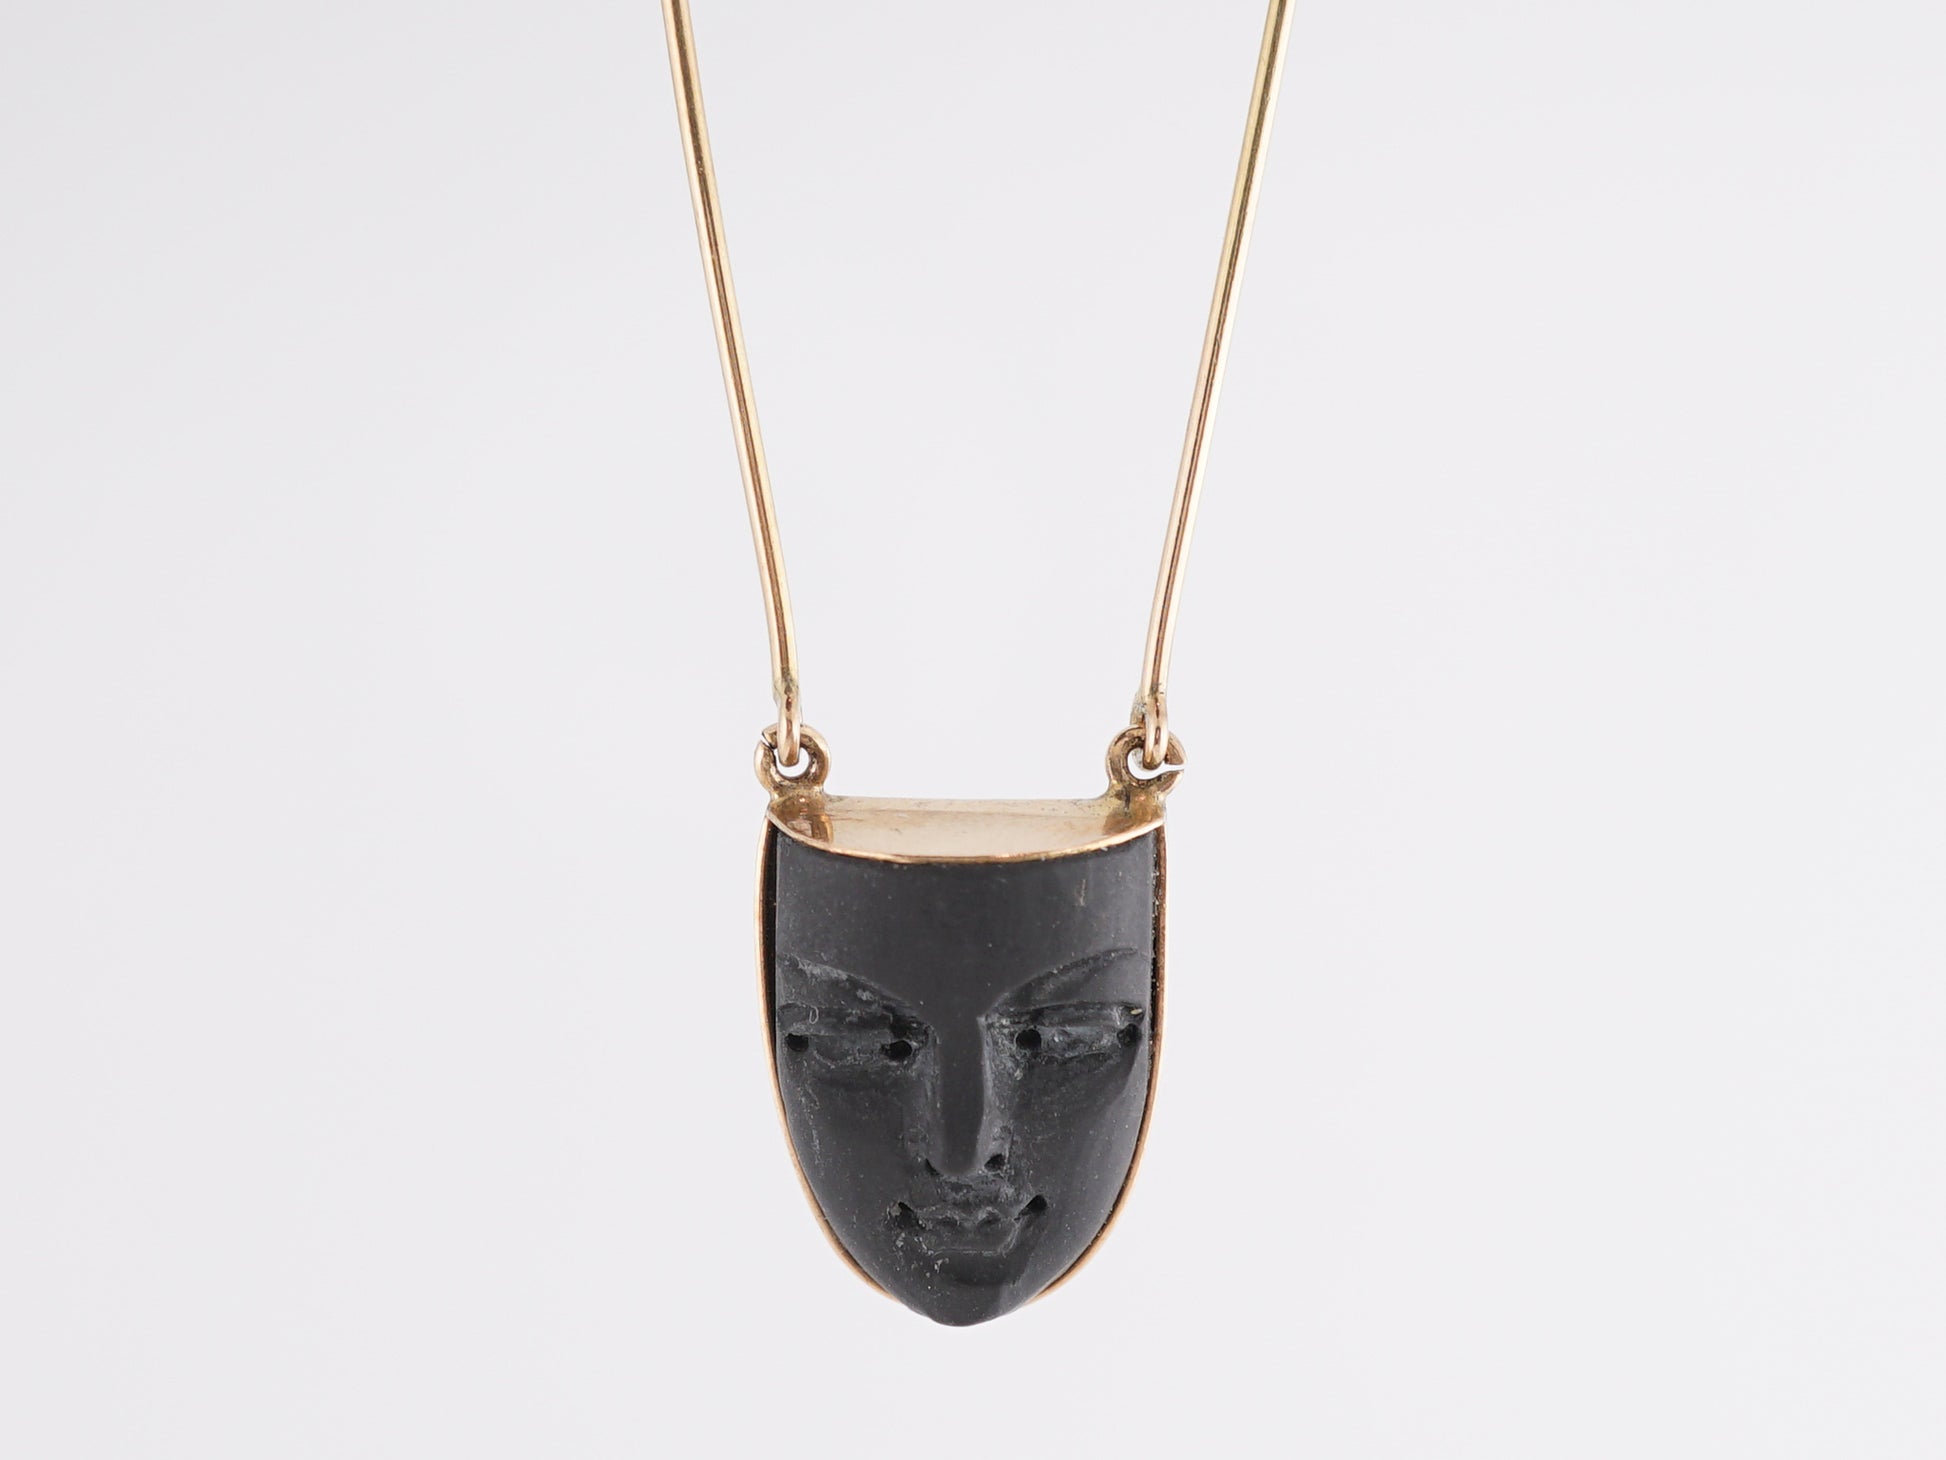 8 Inch Face Pendant in 18k Yellow GoldComposition: PlatinumTotal Gram Weight: 7.5 gInscription: 750